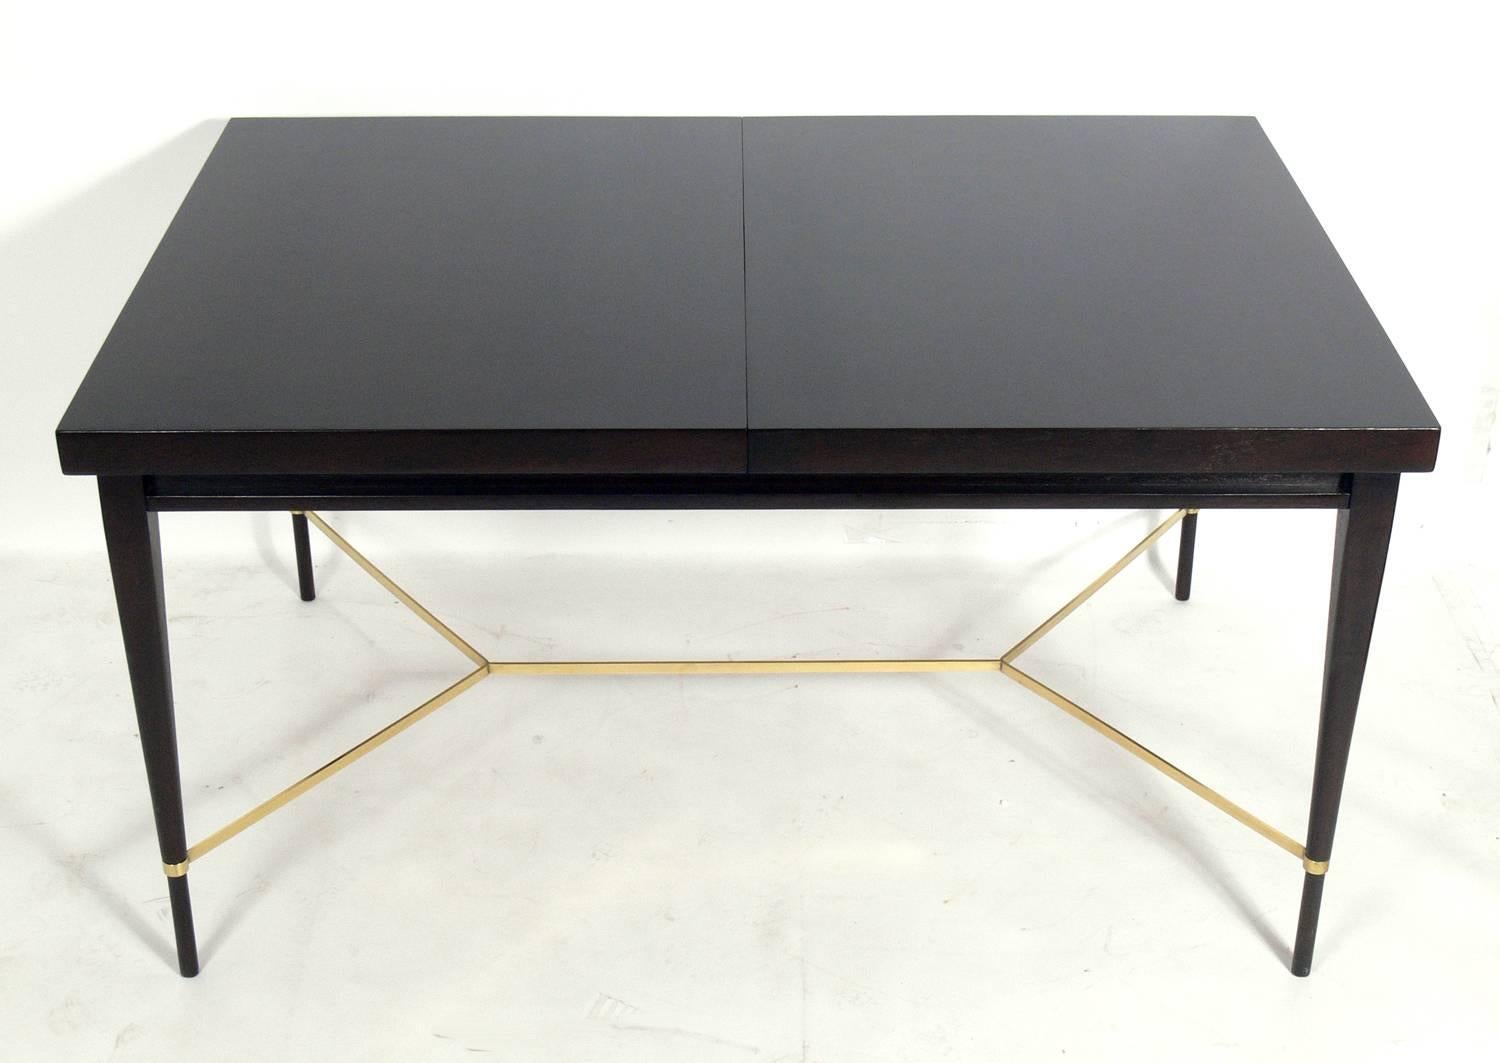 Paul McCobb modern dining table for Calvin, American, circa 1950s. It has been refinished in an ultra-deep brown color lacquer and the brass stretcher has been hand polished and lacquered. There are no additional leaves. Comfortably seats six.